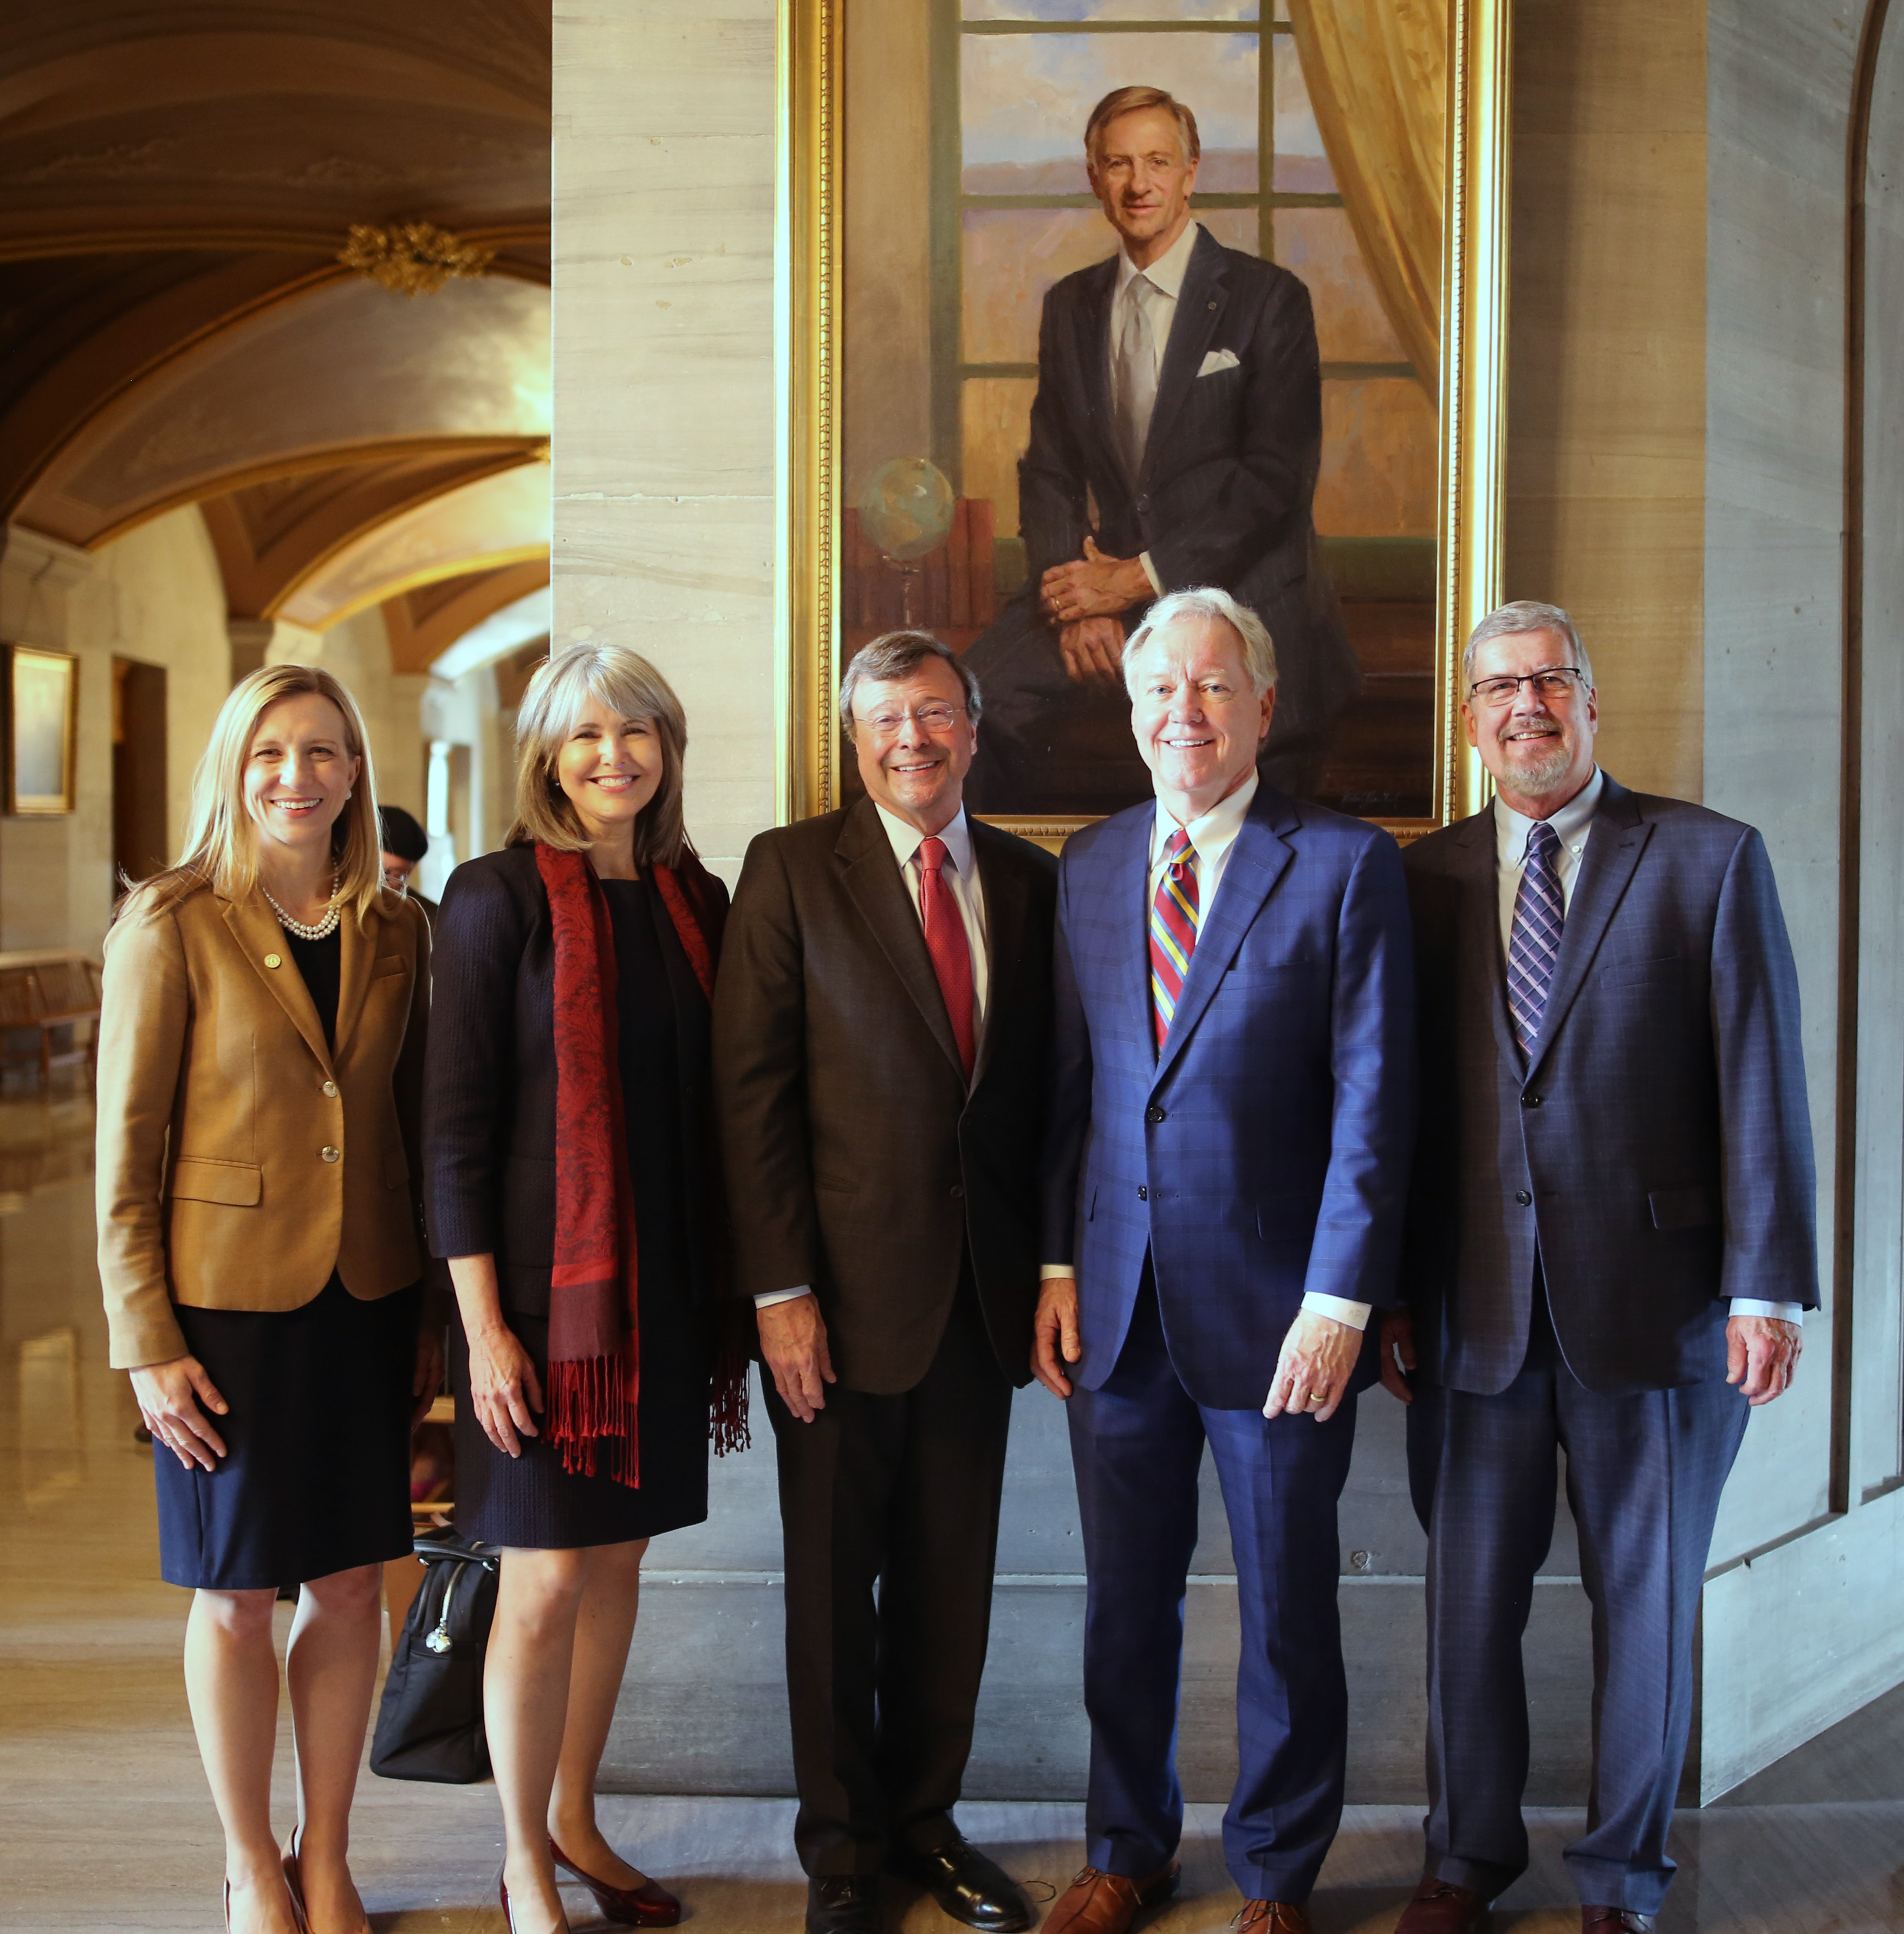 Justice Sarah K. Campbell, Justice Holly Kirby, Justice-designate Dwight E. Tarwater, Chief Justice Roger A. Page, Justice Jeffrey S. Bivins